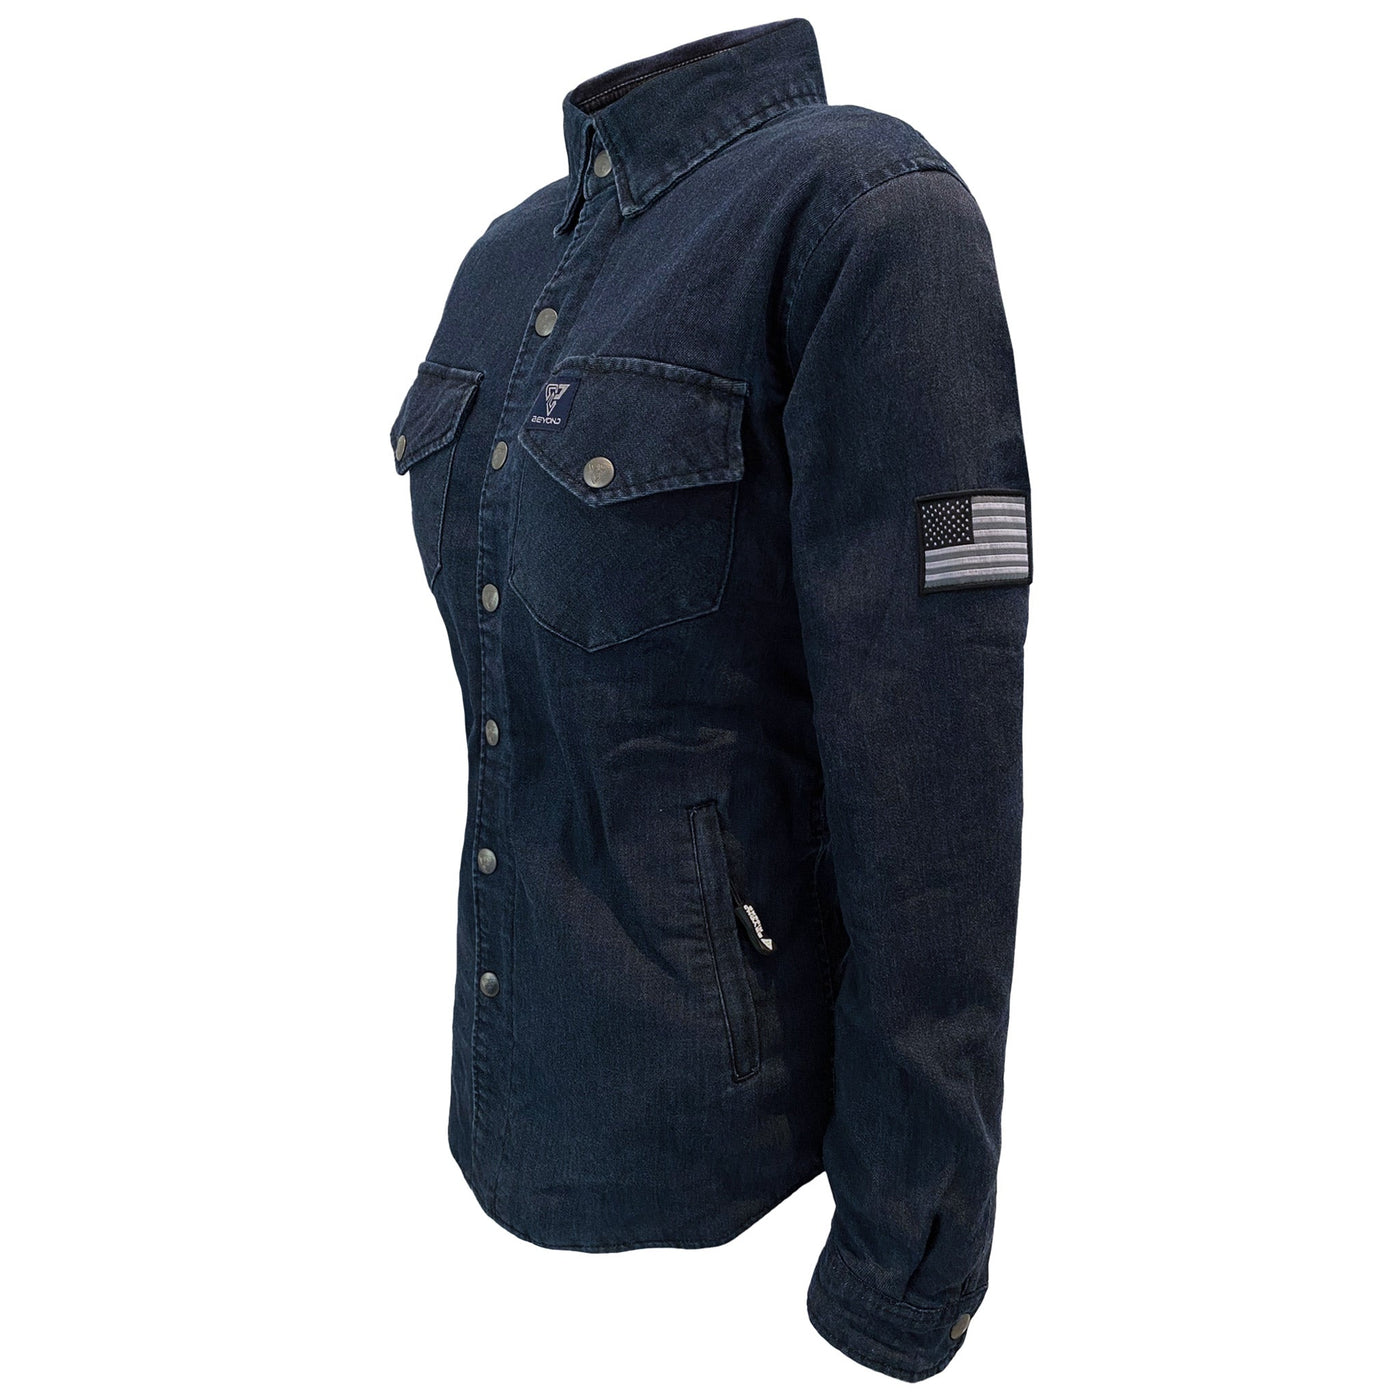 Protective Jeans Jacket with Pads for Women - Indigo Blue